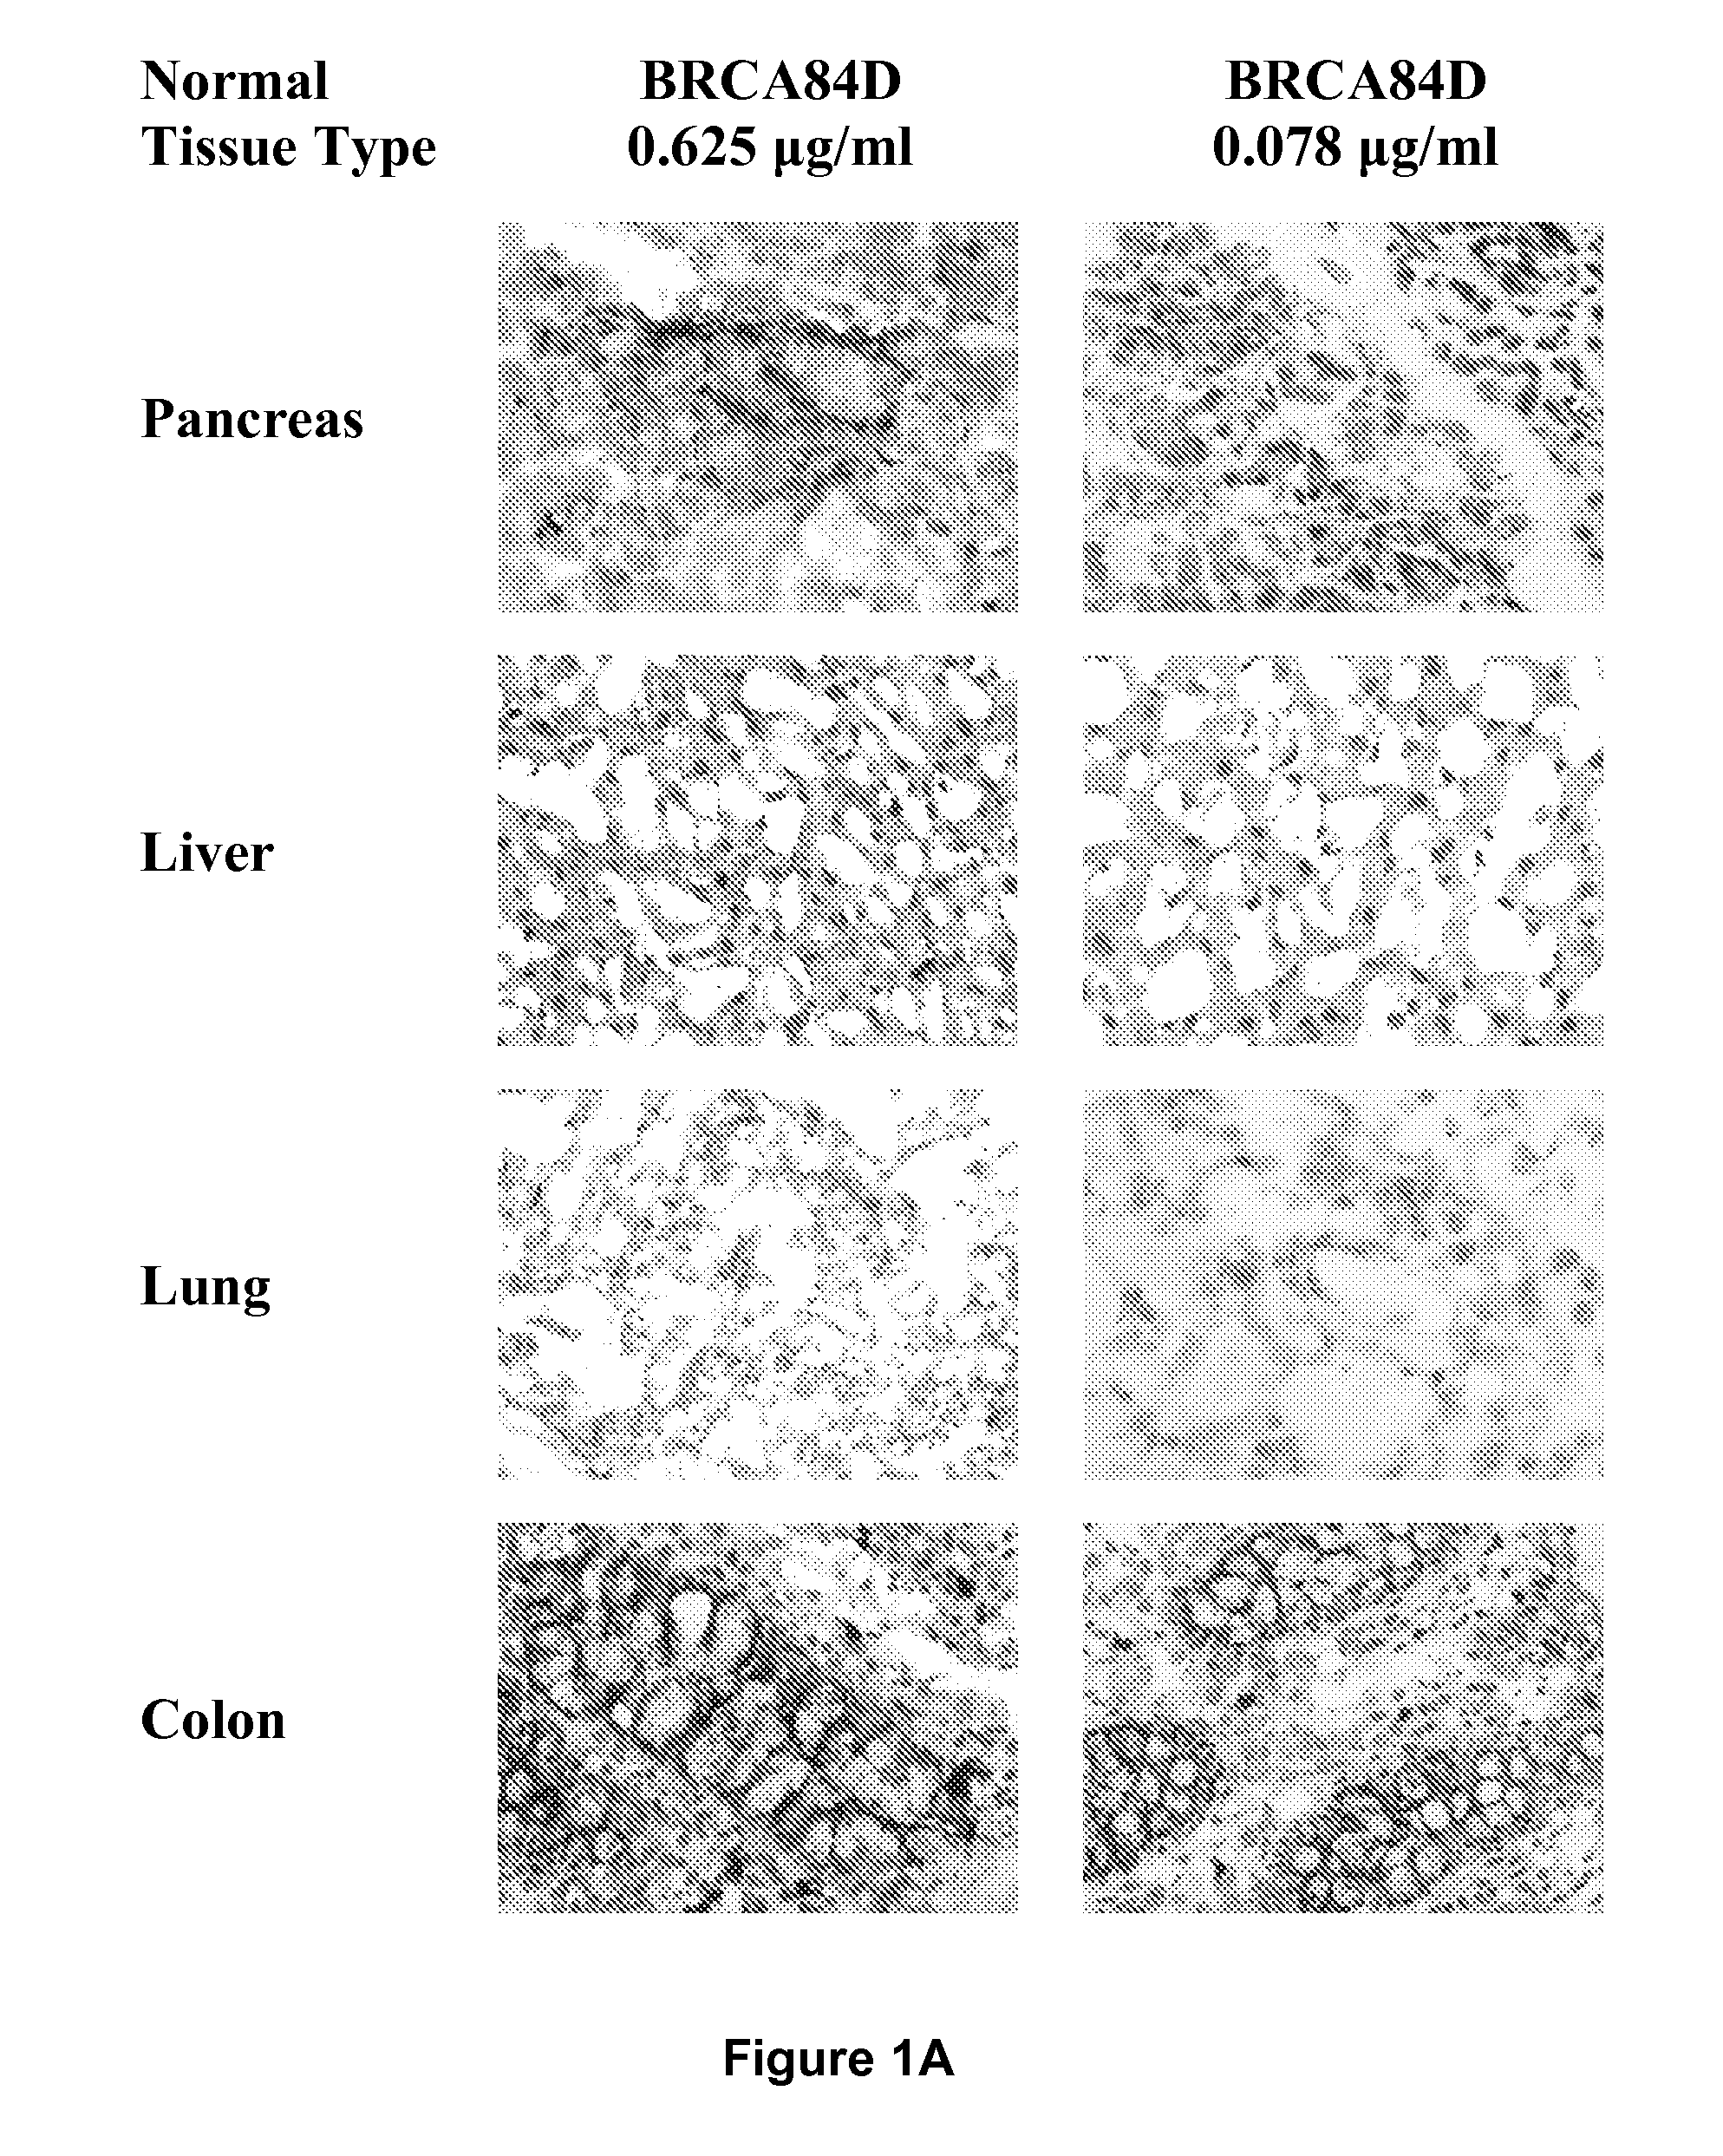 Antibodies Reactive with B7-H3 and Uses Thereof